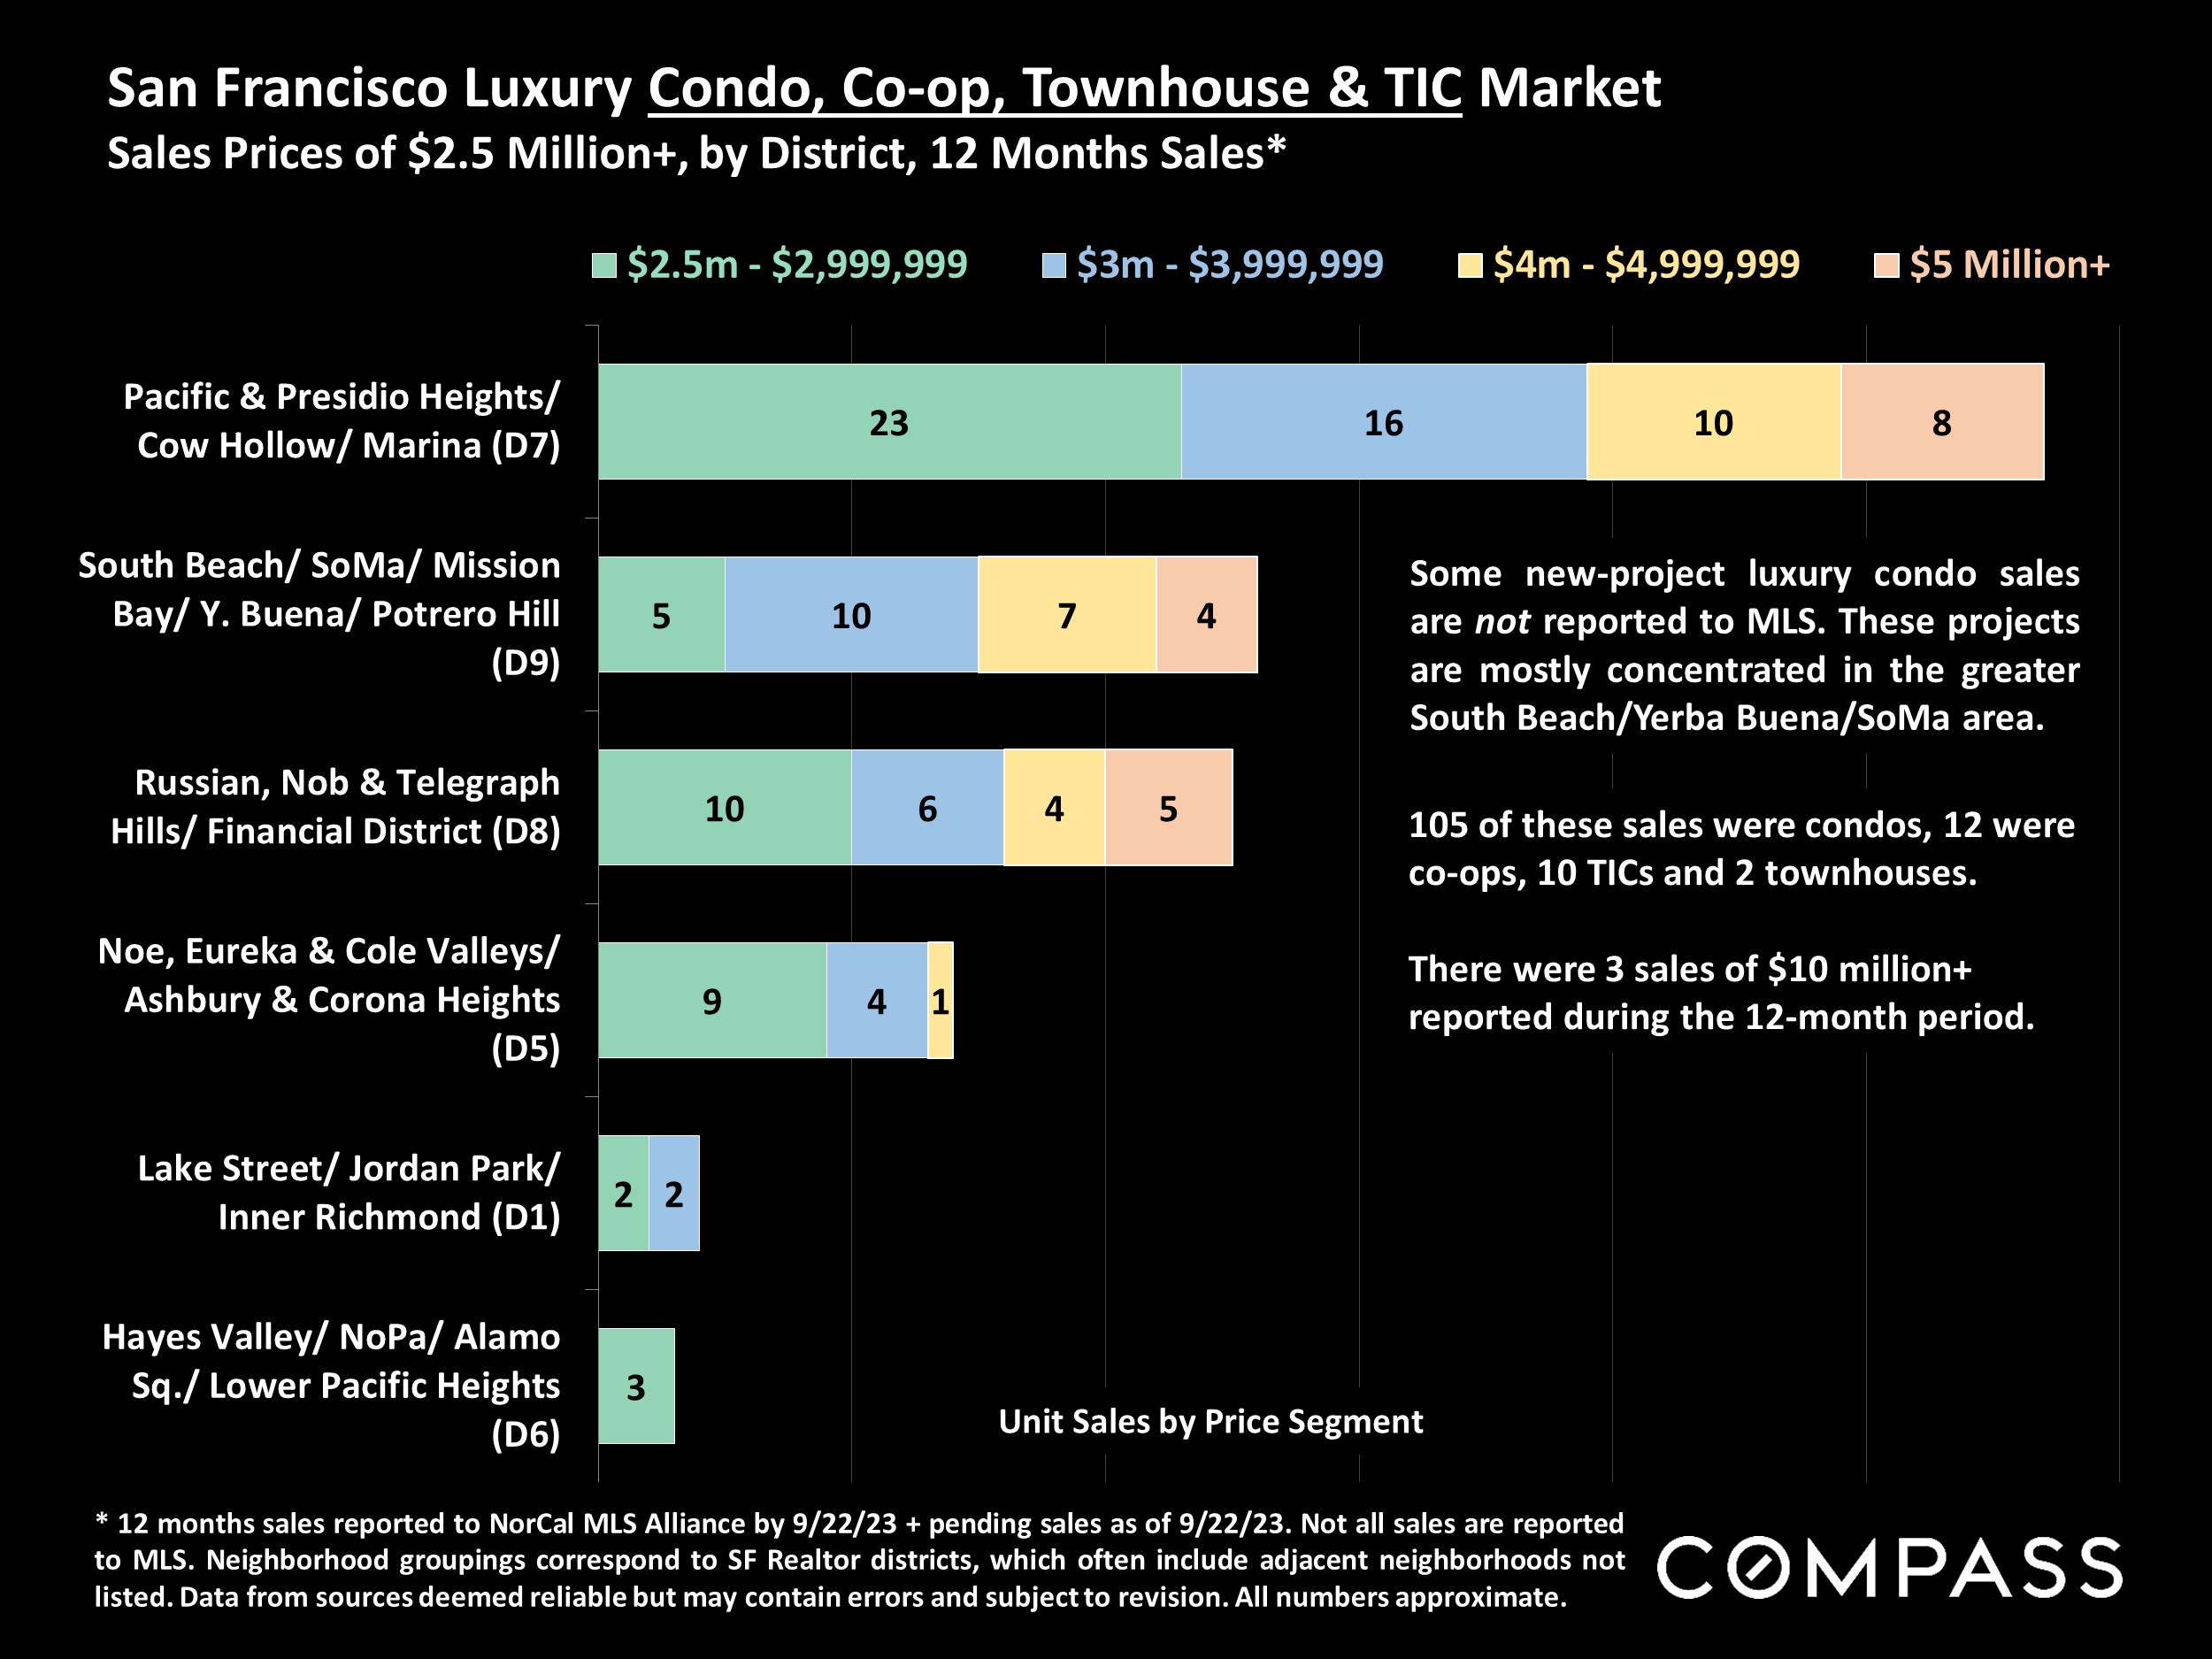 San Francisco Luxury Condo, Co-op, Townhouse & TIC Market Sales Prices of $2.5 Million+, by District, 12 Months Sales*